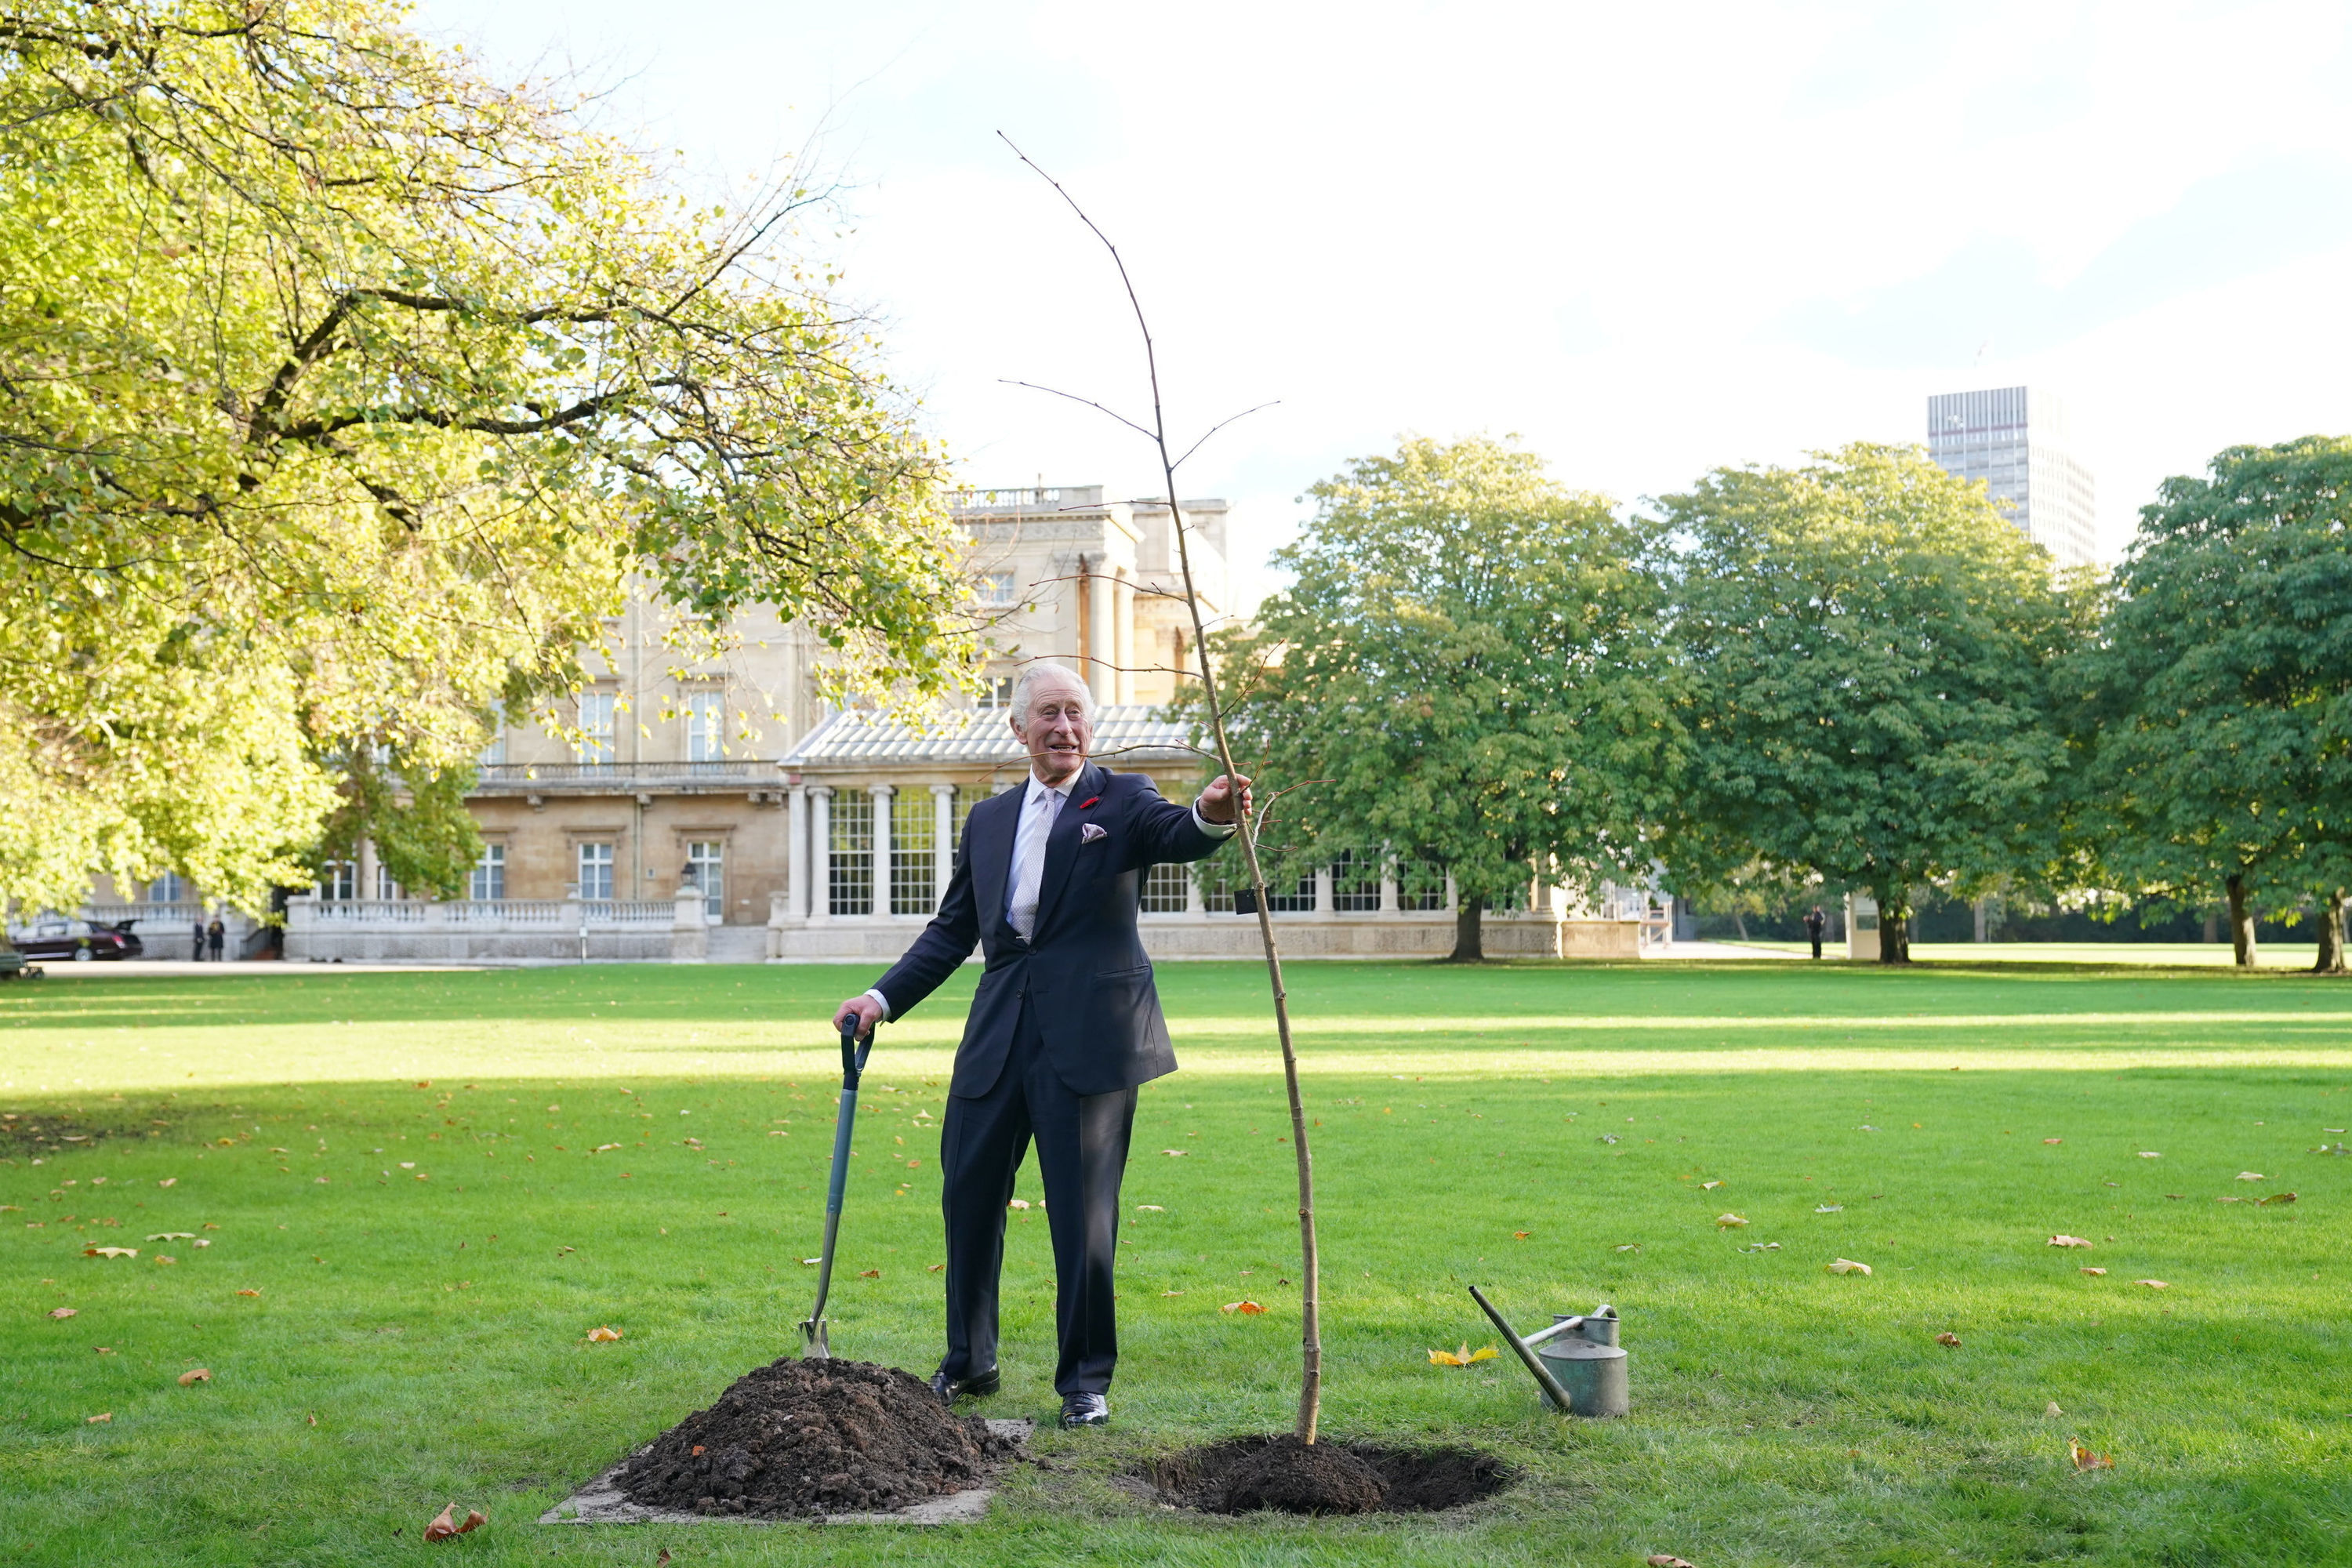 <p>King Charles III planted a lime tree near the Tea House in the Buckingham Palace garden for the Queen's Green Canopy -- a tree-planting initiative created to mark the late monarch Queen Elizabeth II's Platinum Jubilee in 2022 -- after hosting a reception for world leaders, business figures, environmentalists and NGOs at Buckingham Palace in London on Nov. 4, 2022, ahead of the Cop27 Summit in Egypt. </p>